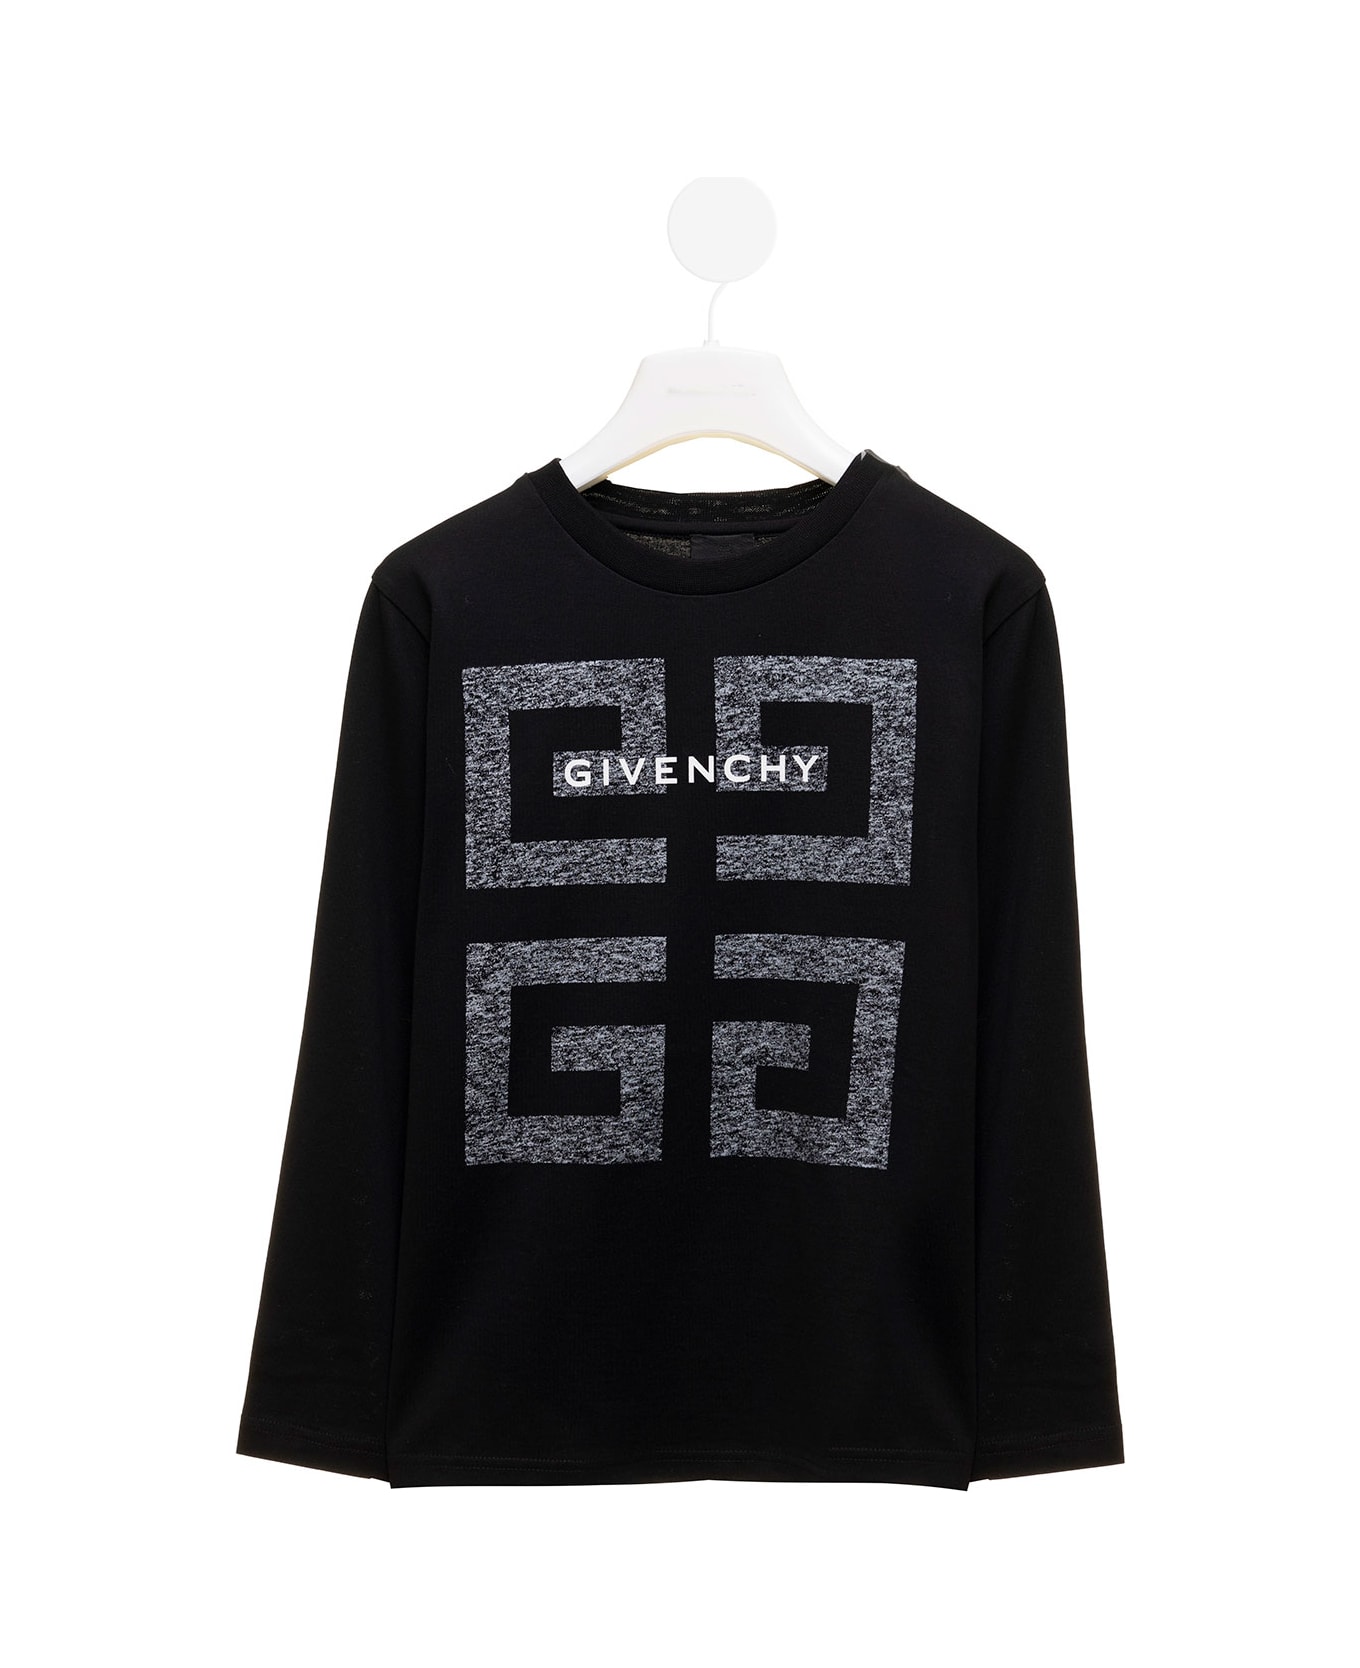 Givenchy Black Cotton Long Sleeved T-shirt With 4g Print Givenchy Kids Boy - Black